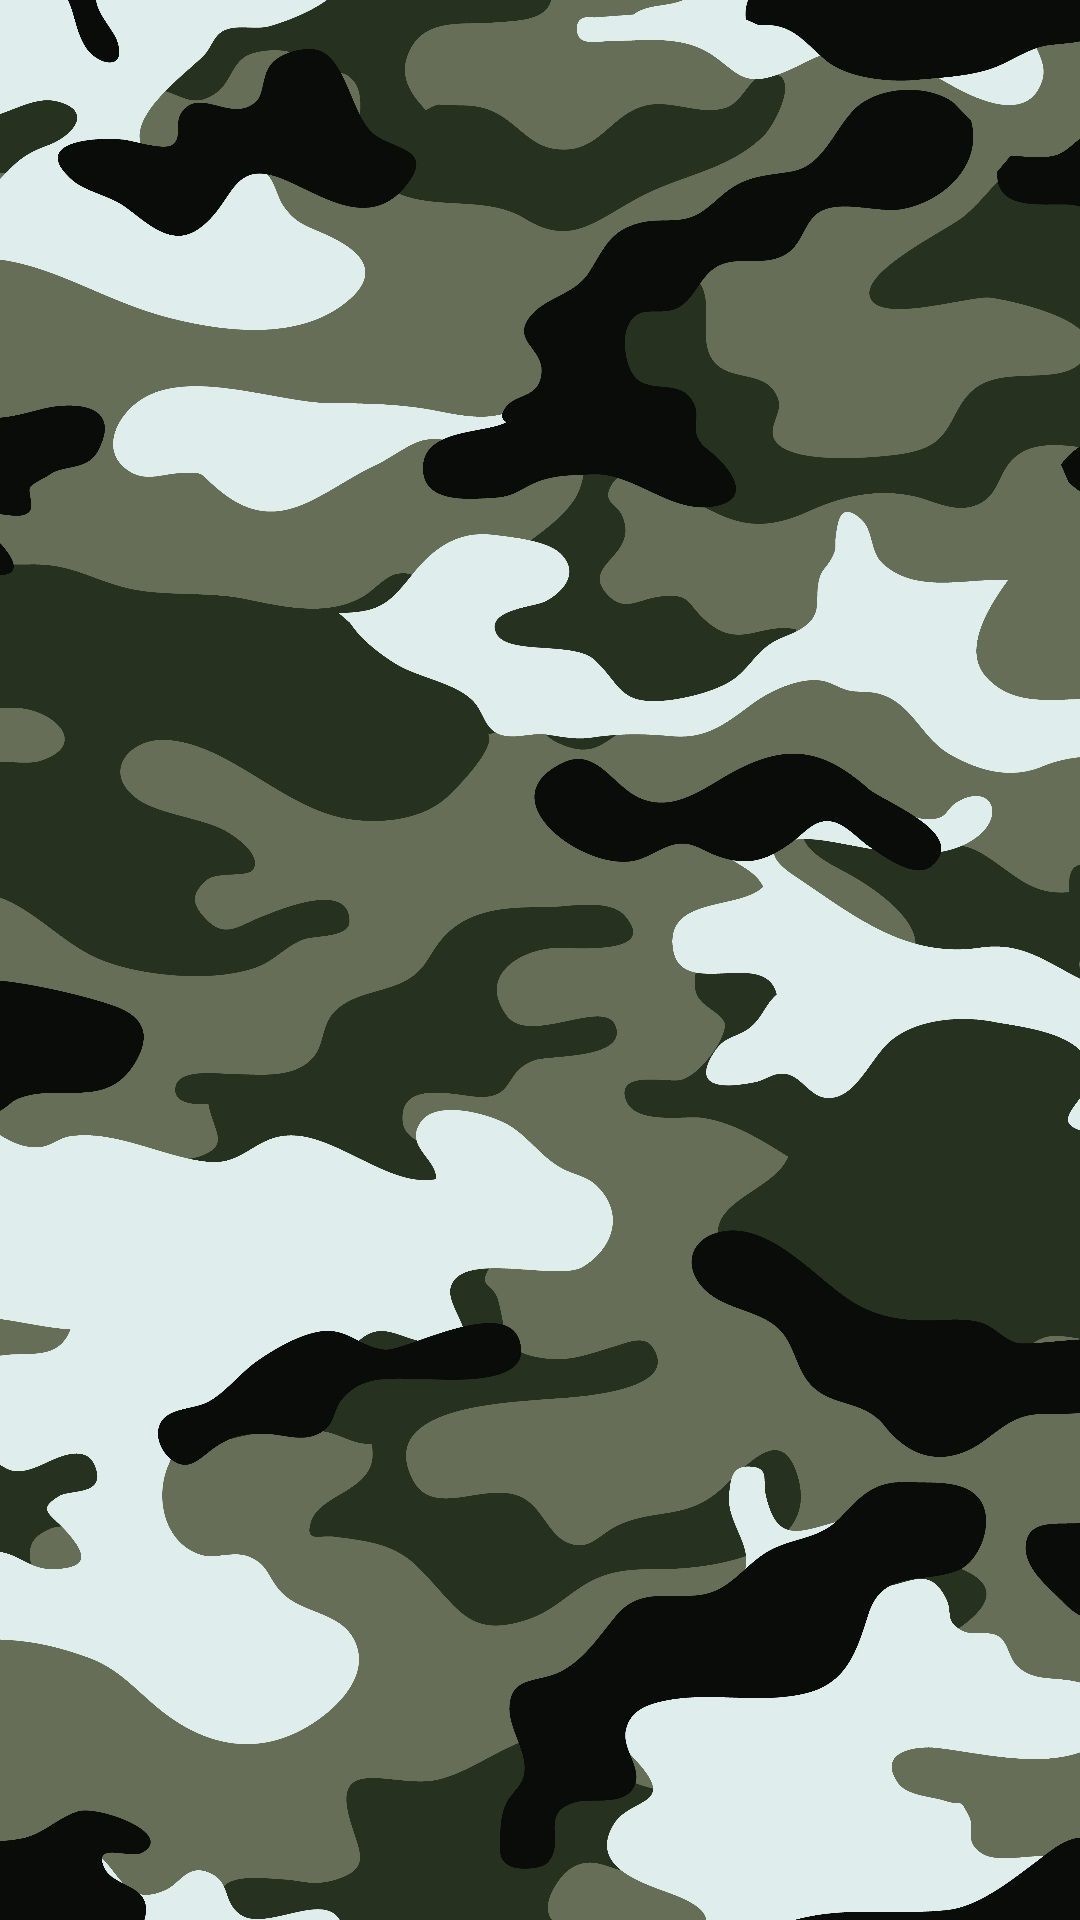 1080x1920  Camouflage wallpaper for iPhone or Android. Tags: camo, hunting,  army,